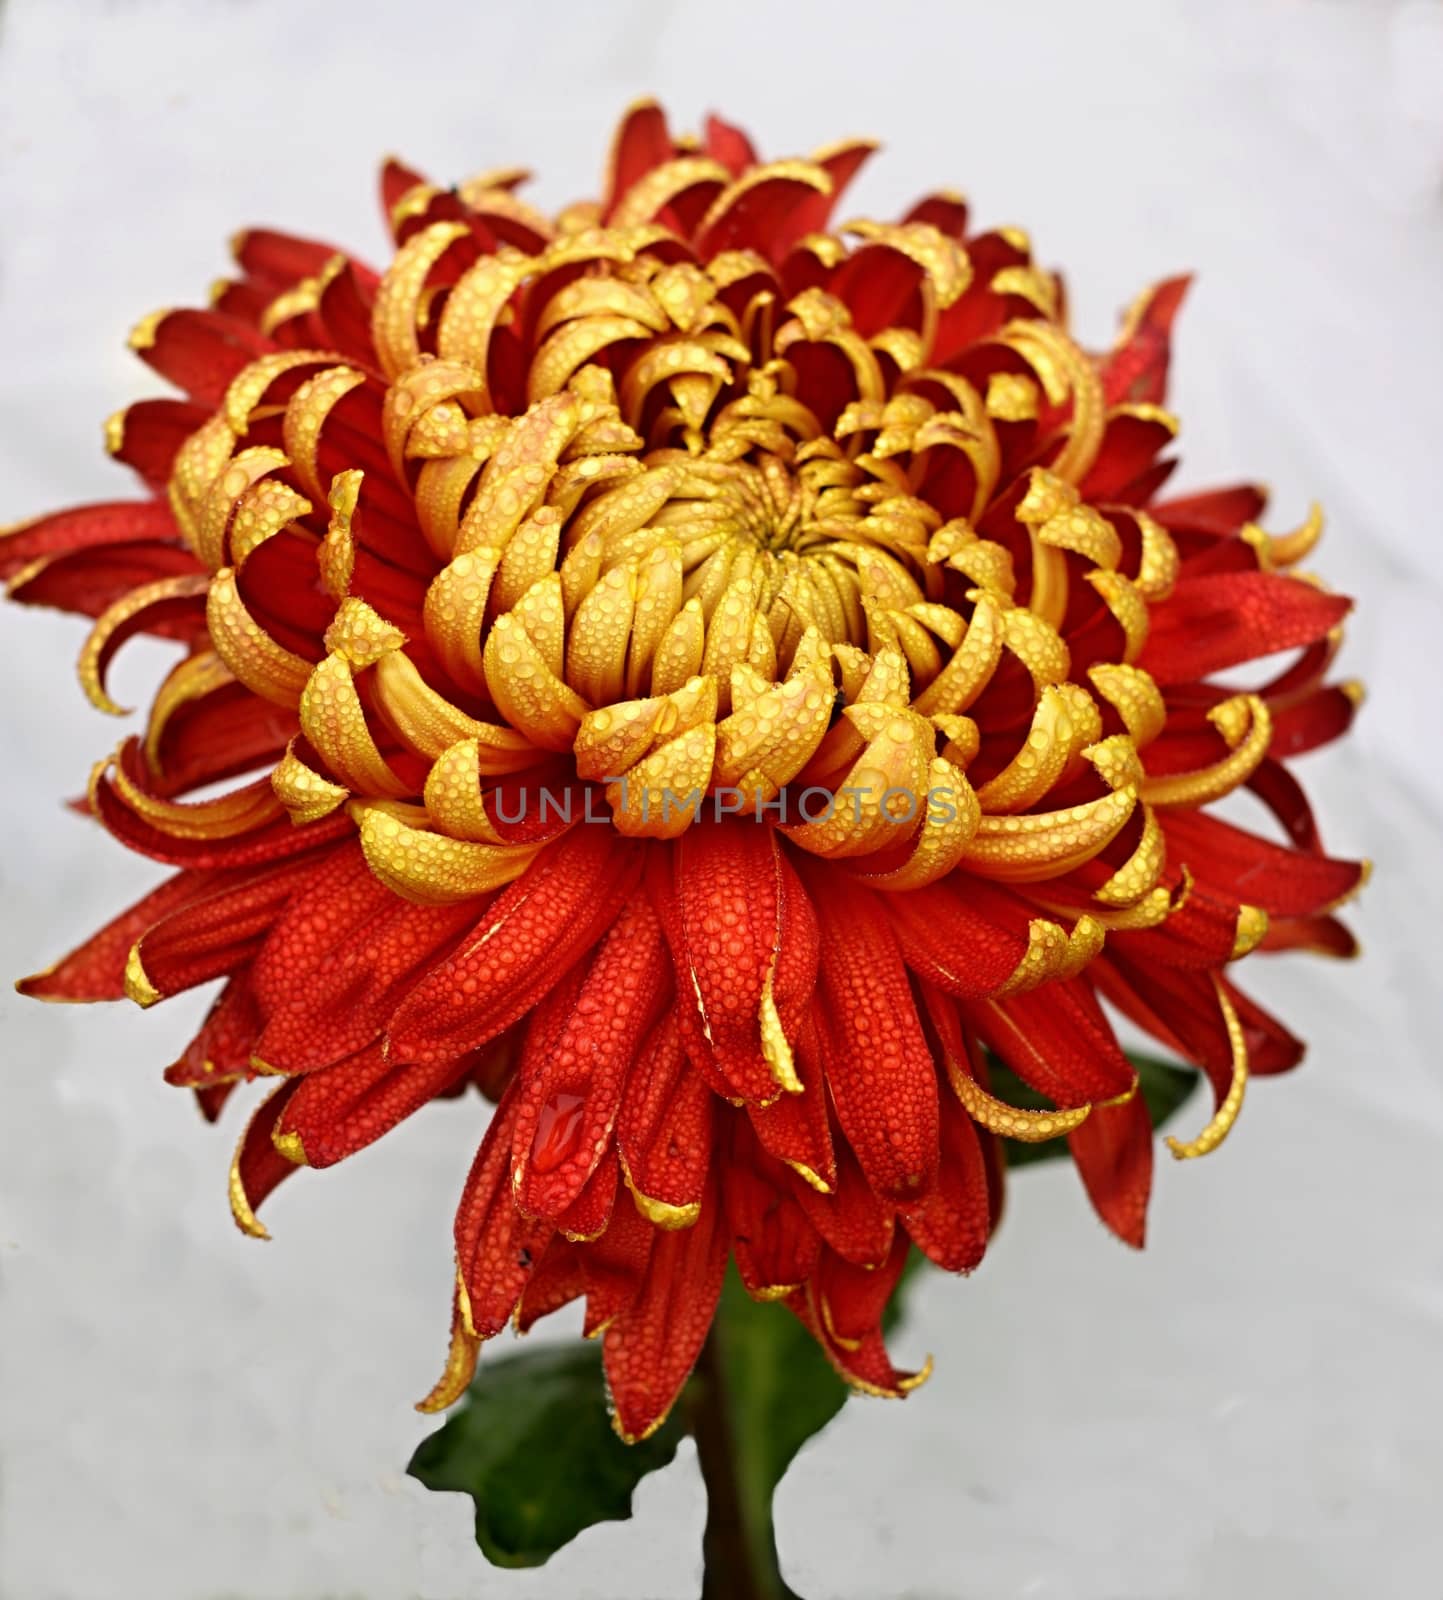 Gold and red dahlia in the rain and white background